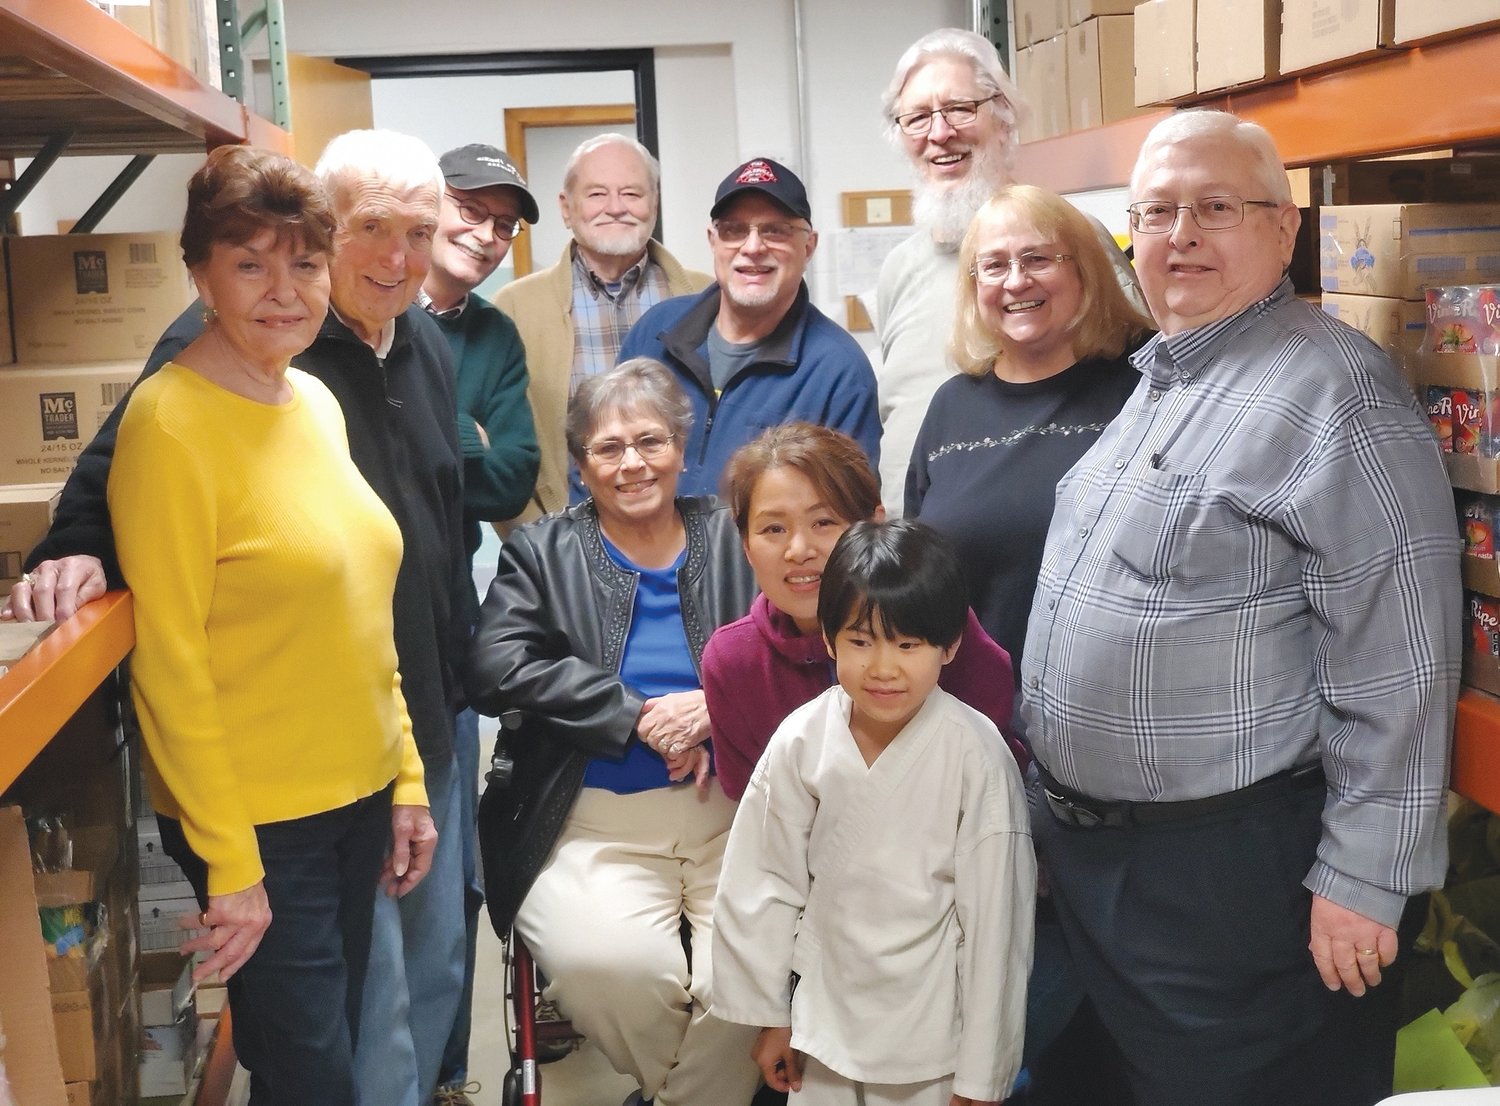 The Crawfordsville Kiwanis Club members again exceeded expectations by bagging 111 bags in 30 minutes for the Youth Service Bureau's Nourish Program. Participants in this record-setting effort are pictured, from left, Carolyn Sering, Bud Arnold, Dave Polley, Roberta McBride, Conrad Harvey, Andy Biddle, Rumiko Nishina, Sayoko Nishina, Gary Behling, Terri Behling and Larry McBride. Nourish is mobilizing hundreds of volunteers who pack and deliver the backpacks to schools and pre-schools each week. Since the inception of the backpack program in 2014, they have already delivered more than 44,000 backpacks. The Crawfordsville Kiwanis Club is excited about working with the Nourish Program each month to help provide food to those that may not have it available to them each week. If you would like to help out come to one of our meetings held every Thursday at the Crawfordsville District Public Library on the lower level at 11:45 a.m.